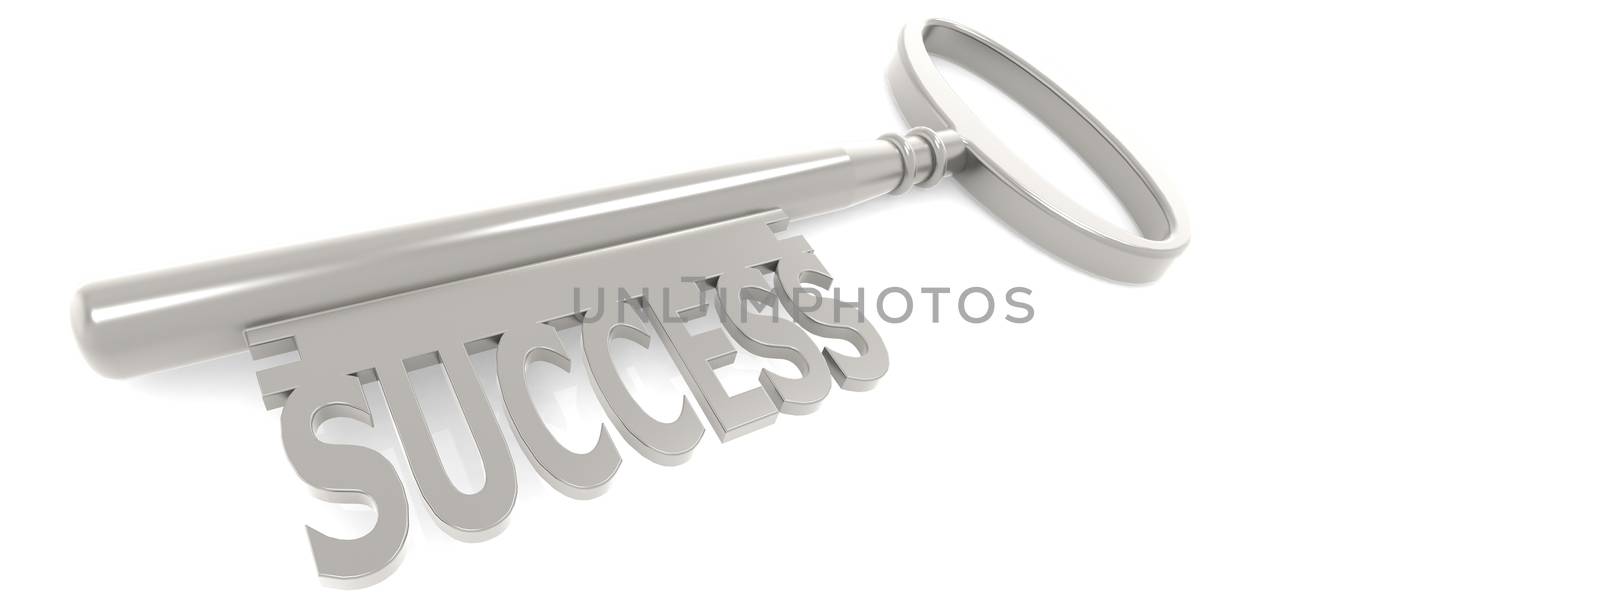 Key to success concept isolated by tang90246